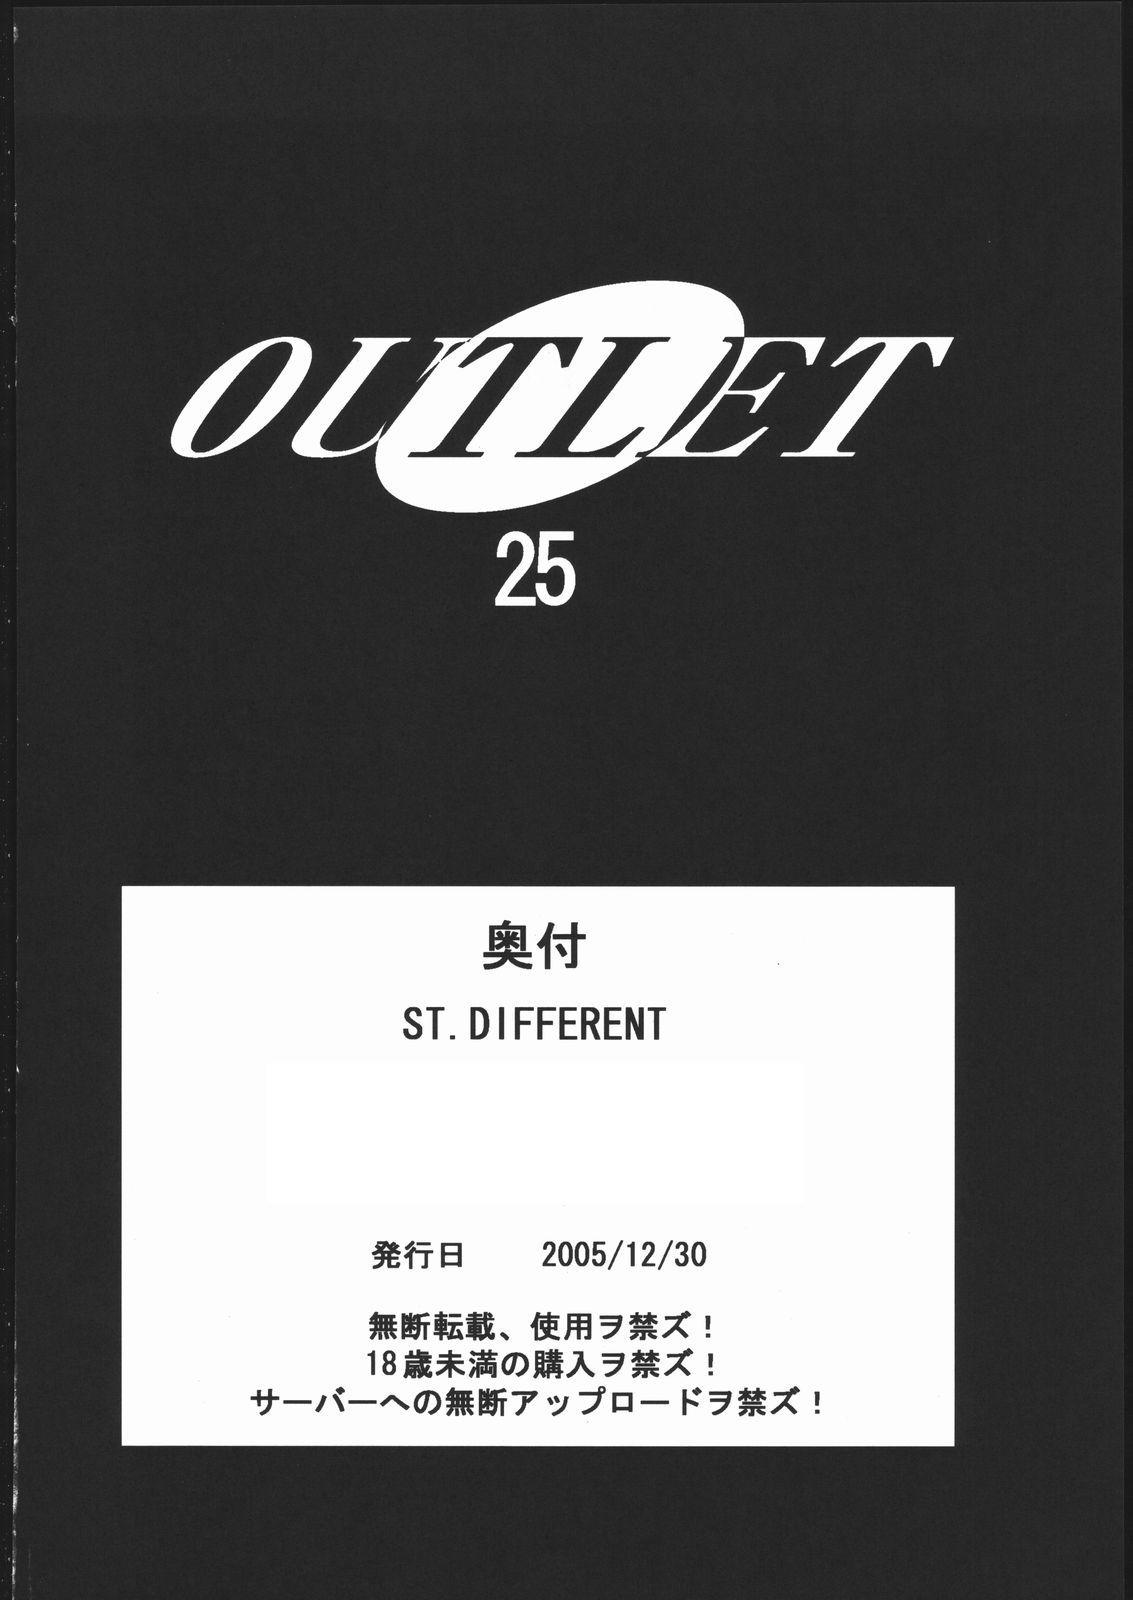 OUTLET 25 52